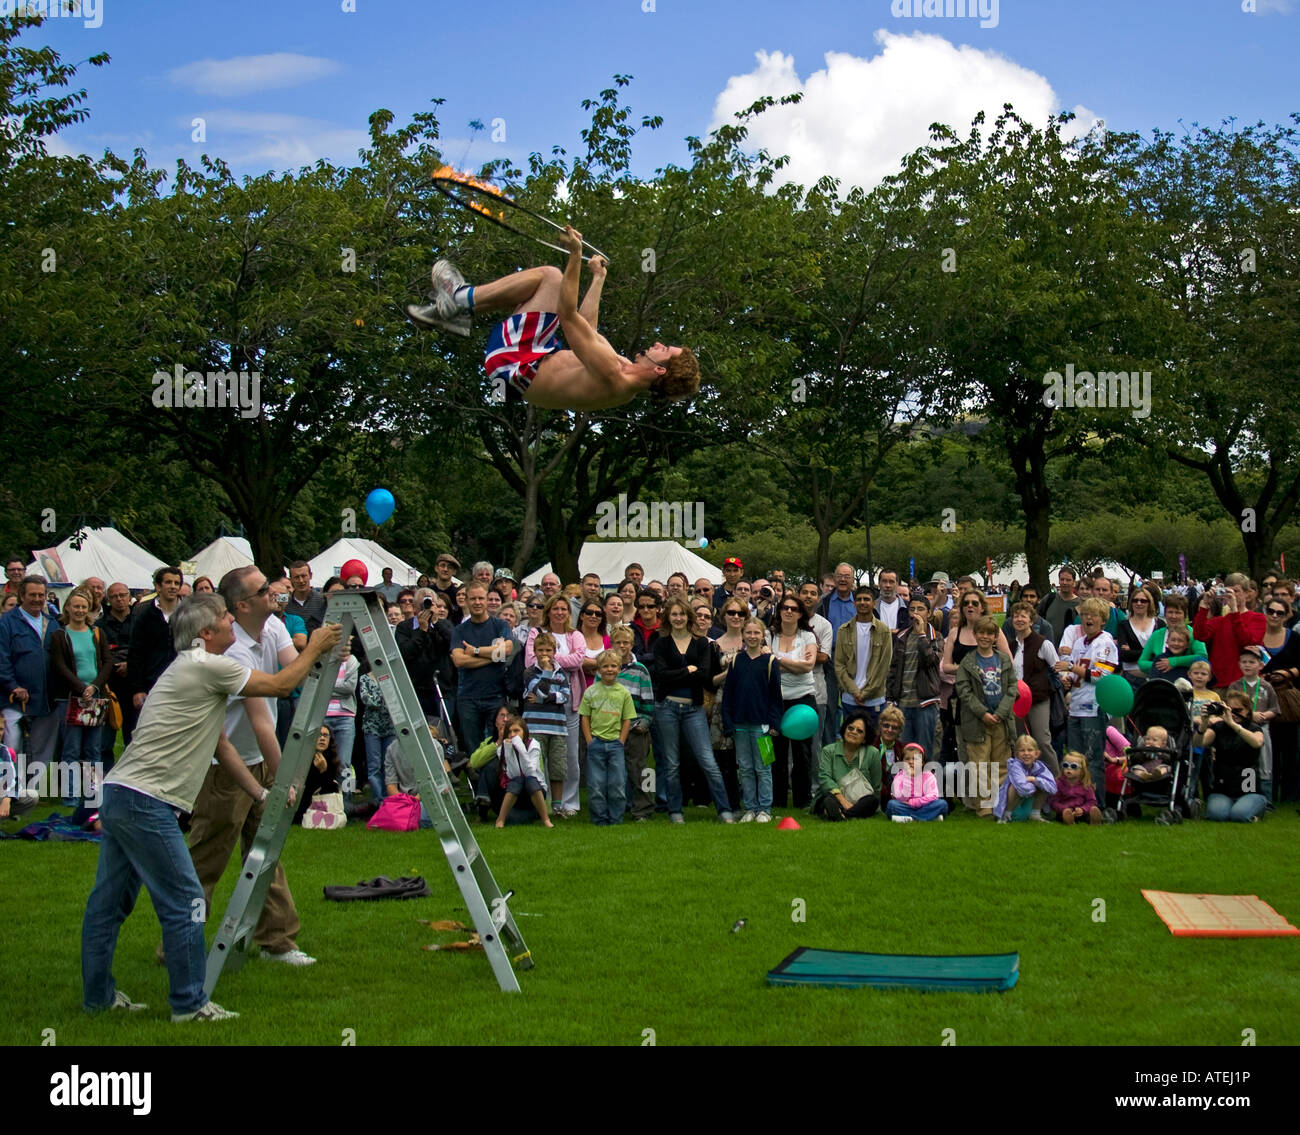 Performer leaps in the air while holding a hoop,  Edinburgh Fringe Sunday 2007, Meadows, Scotland, UK, Europe Stock Photo